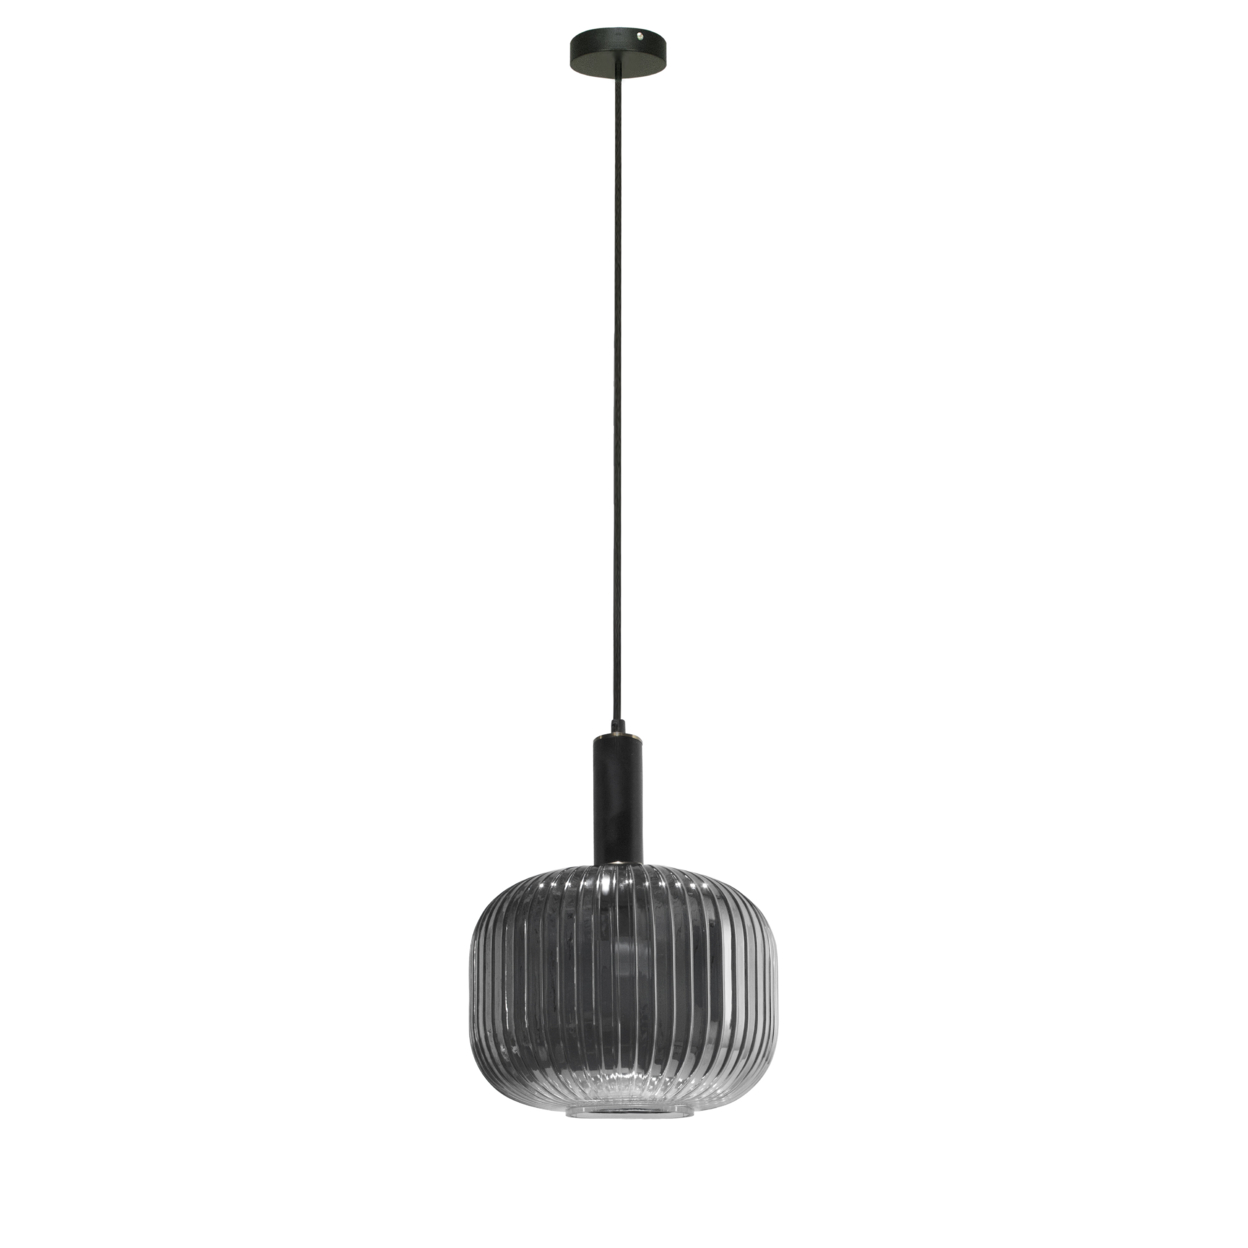 Langley Contemporary Pendant Light Fixture with Grey Glass Shade, Elegant Multi Directional Ceiling Fixture for Living Room, Foyer